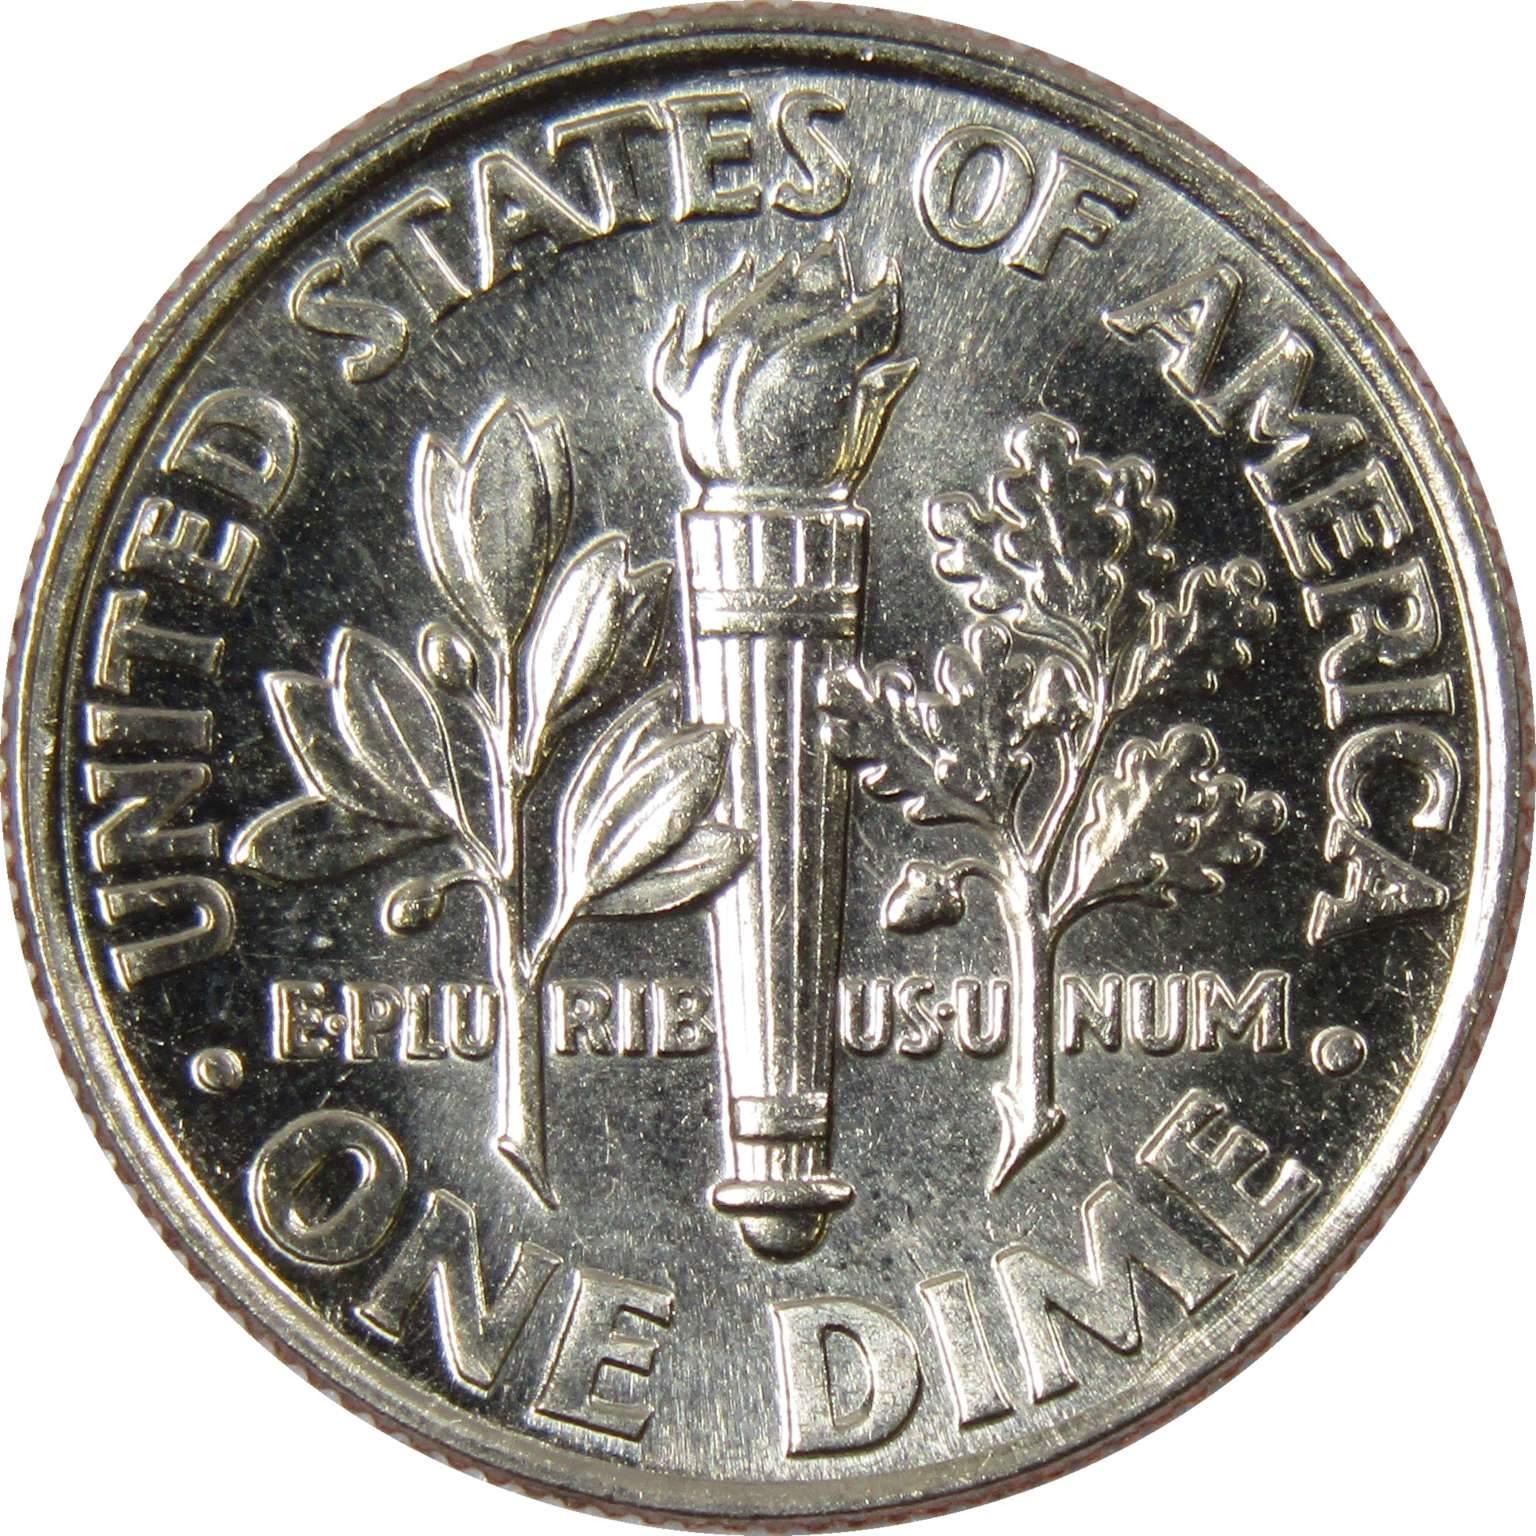 2001 P Roosevelt Dime BU Uncirculated Mint State 10c US Coin Collectible